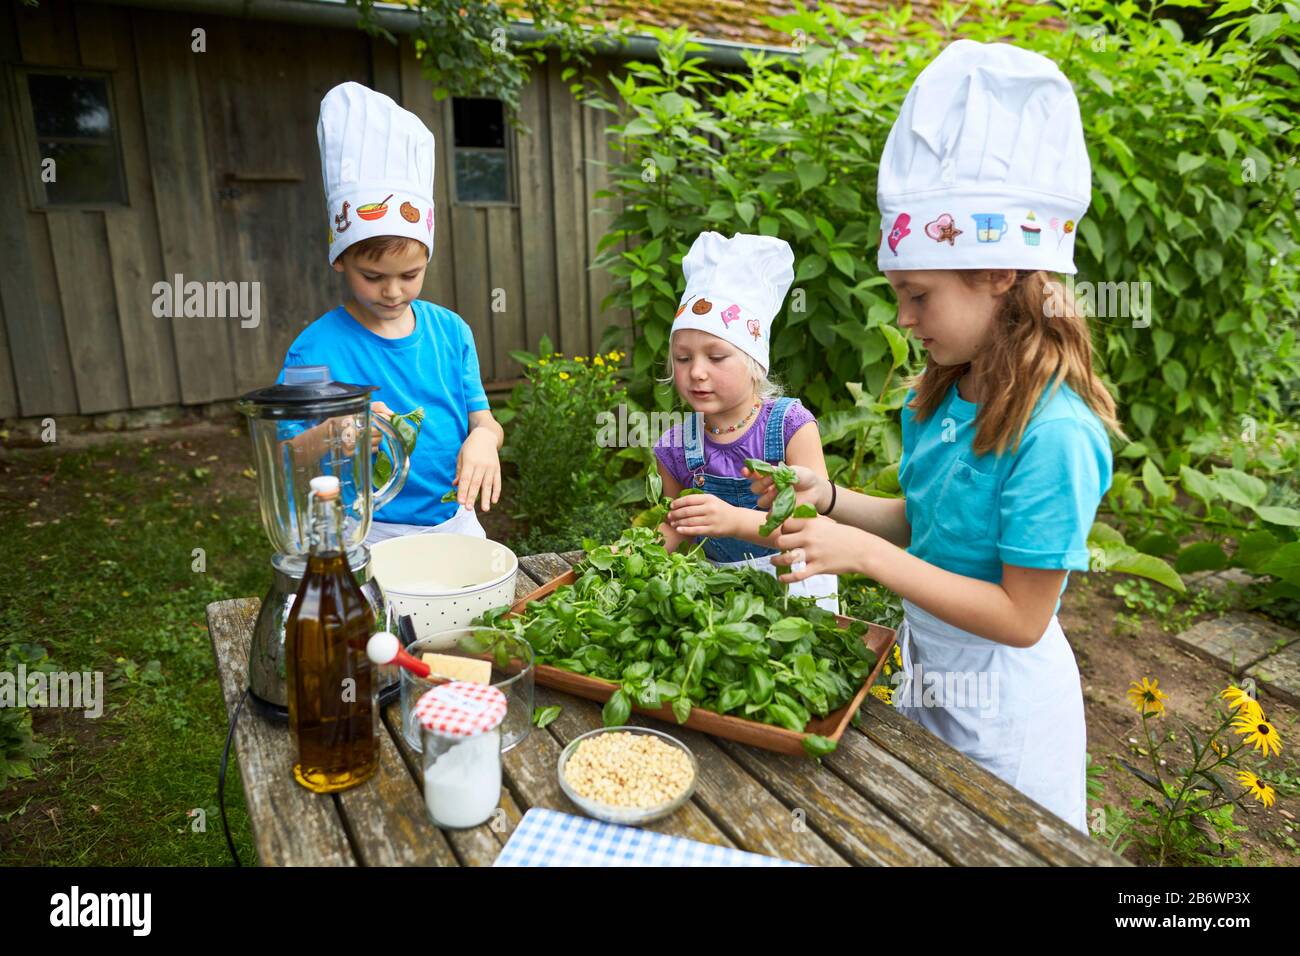 Children investigating food. Series: Making pesto. Learning according to the Reggio Pedagogy principle, playful understanding and discovery. Germany. Stock Photo